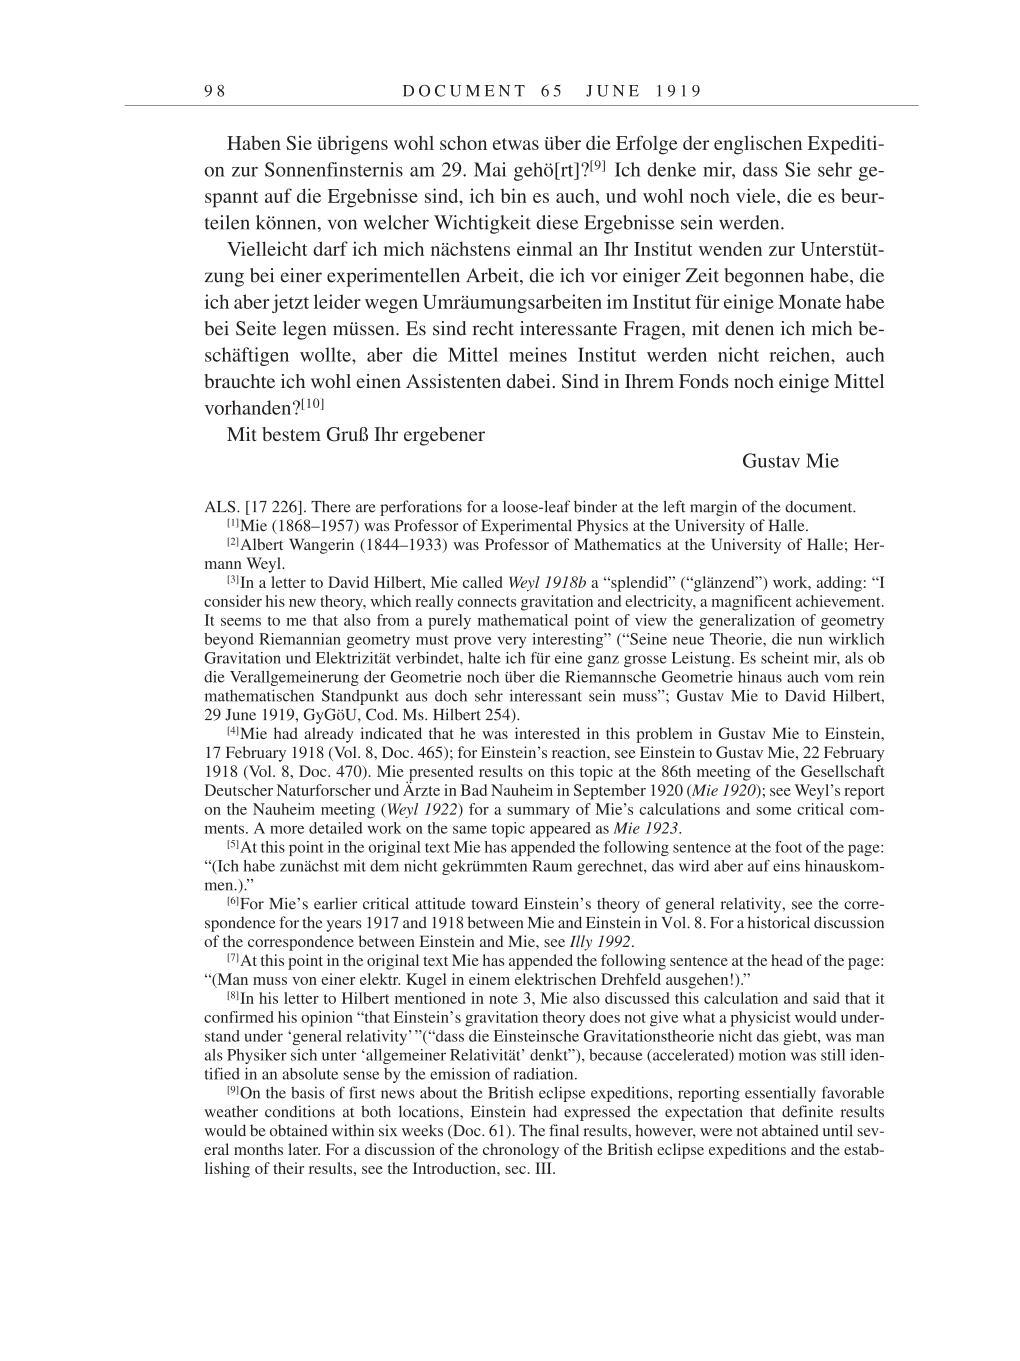 Volume 9: The Berlin Years: Correspondence January 1919-April 1920 page 98